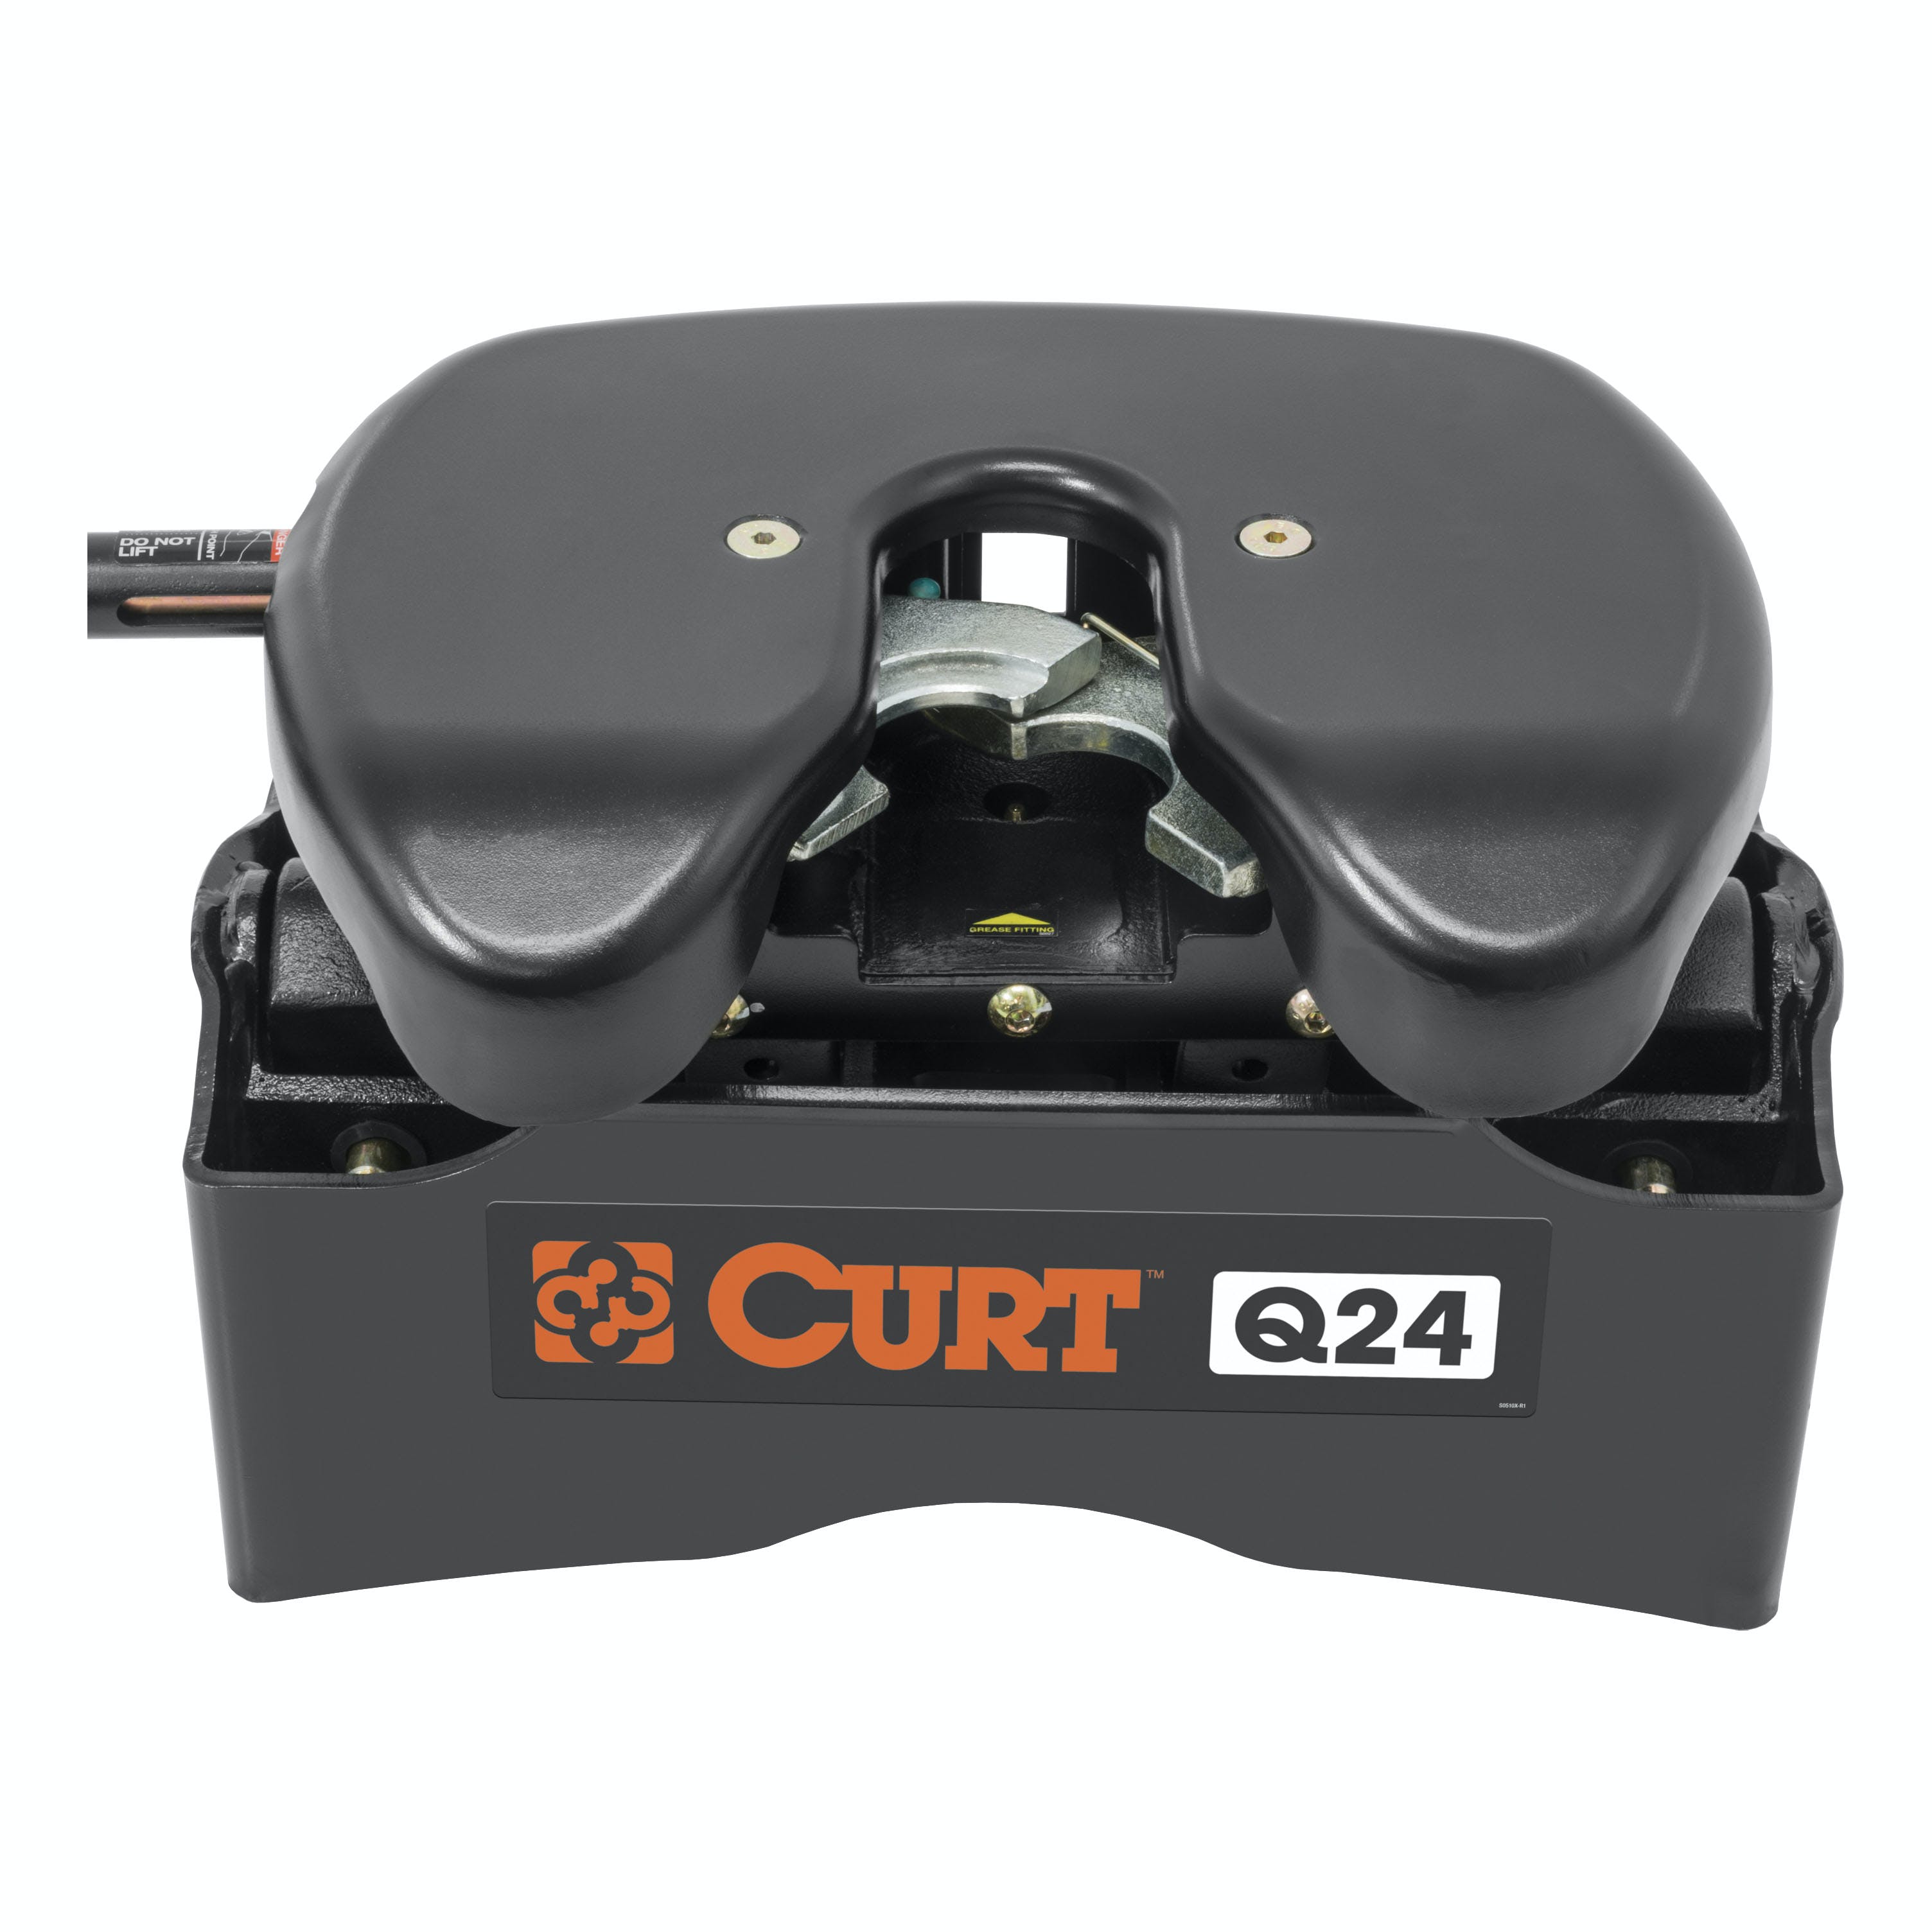 CURT 16037 Q24 5th Wheel Hitch, Select Ford F-250, F-350, F-450, 8' Bed Puck System